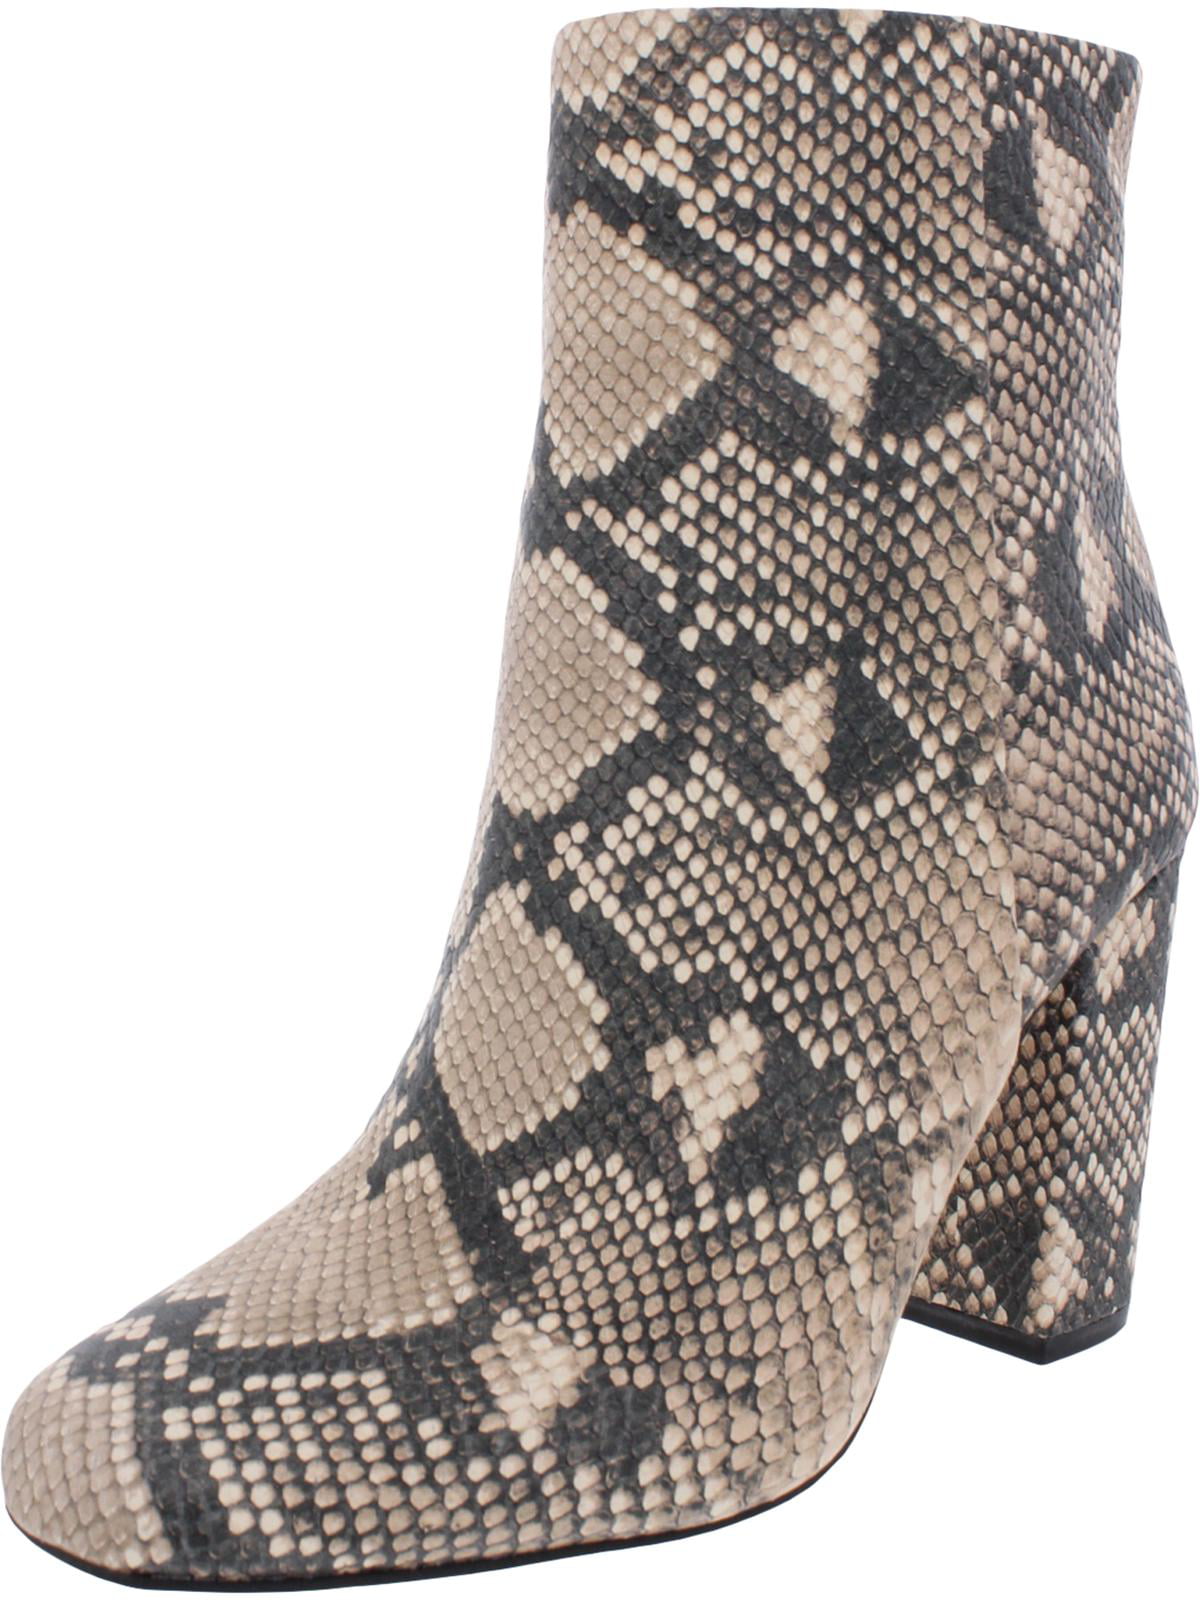 Vince Camuto - Vince Camuto Womens Dannia Leather Snake Print Ankle ...